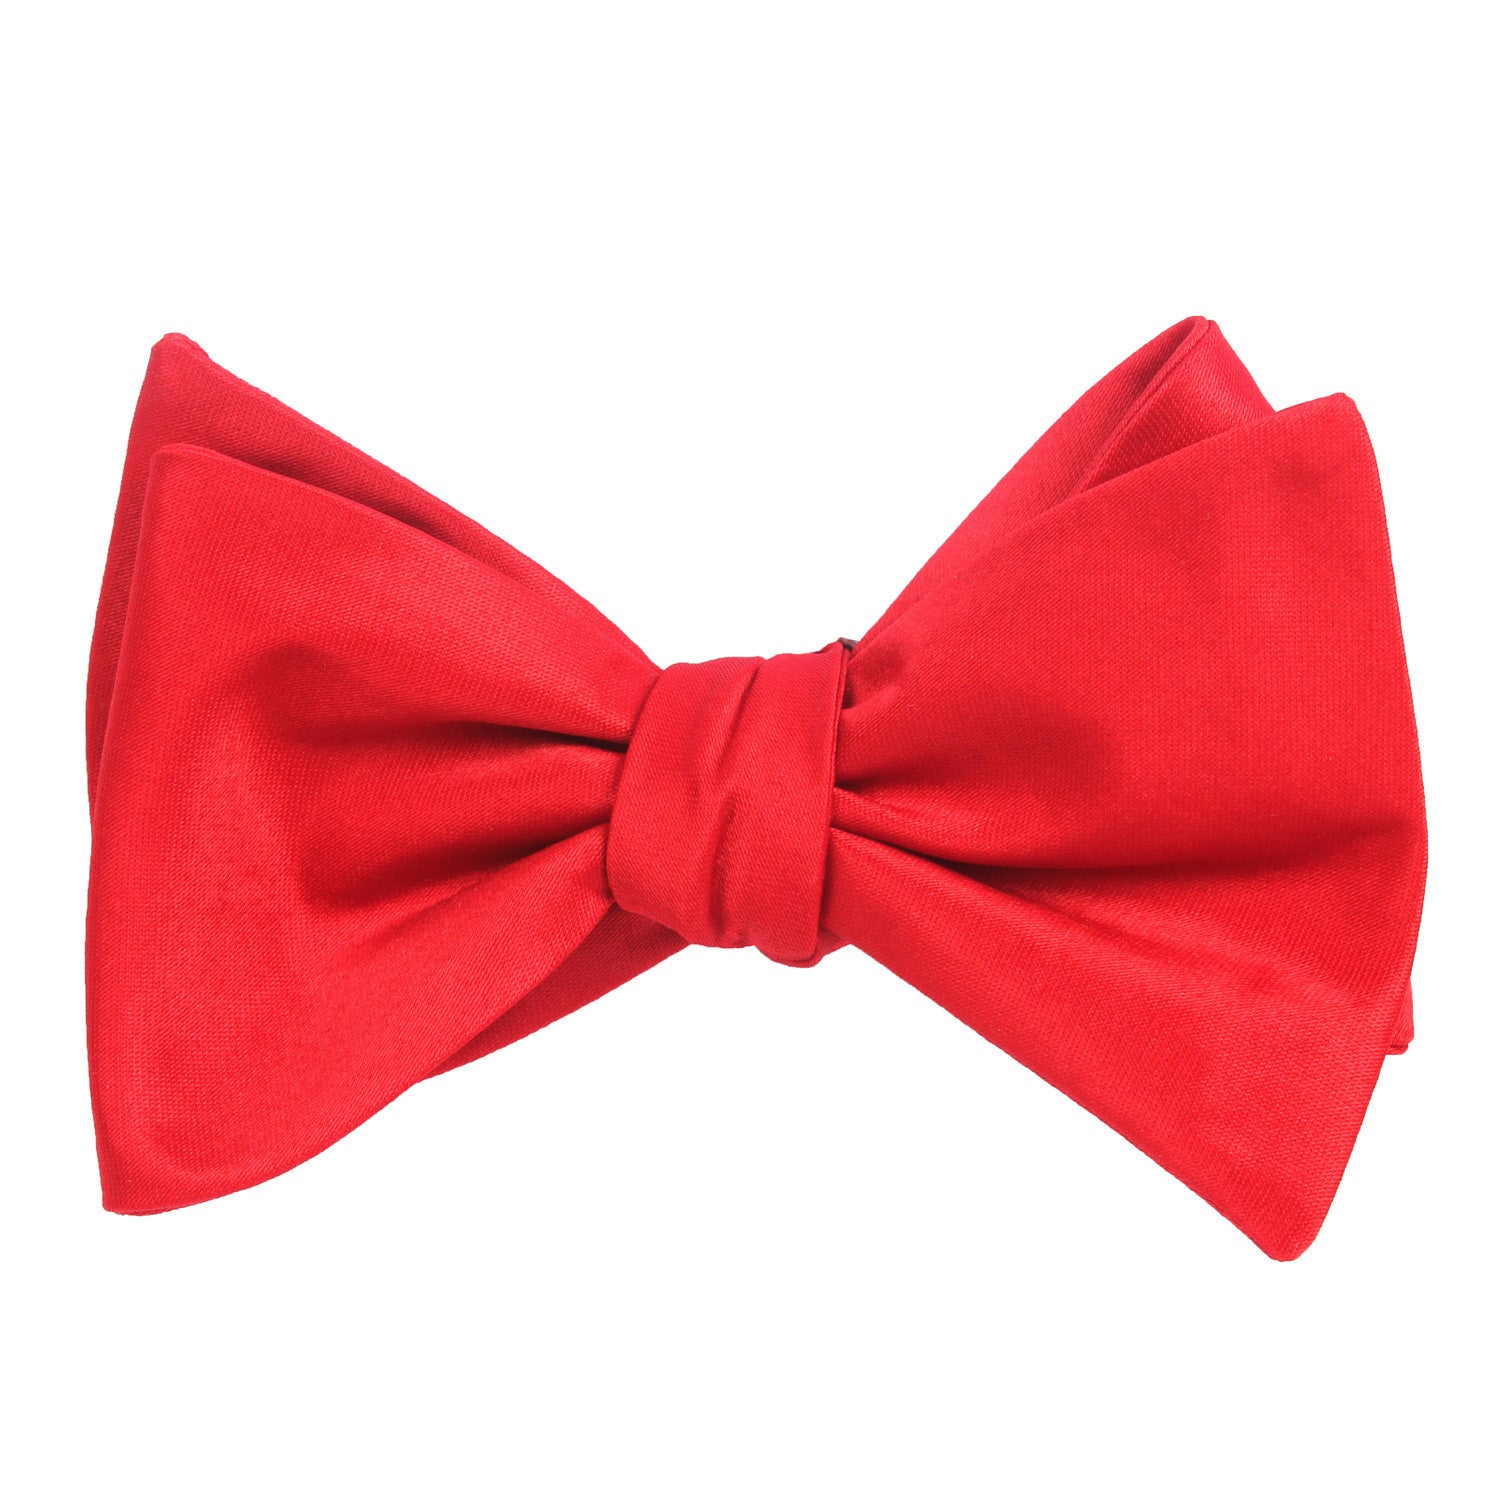 Red Maroon - Bow Tie (Untied) Self tied knot by OTAA